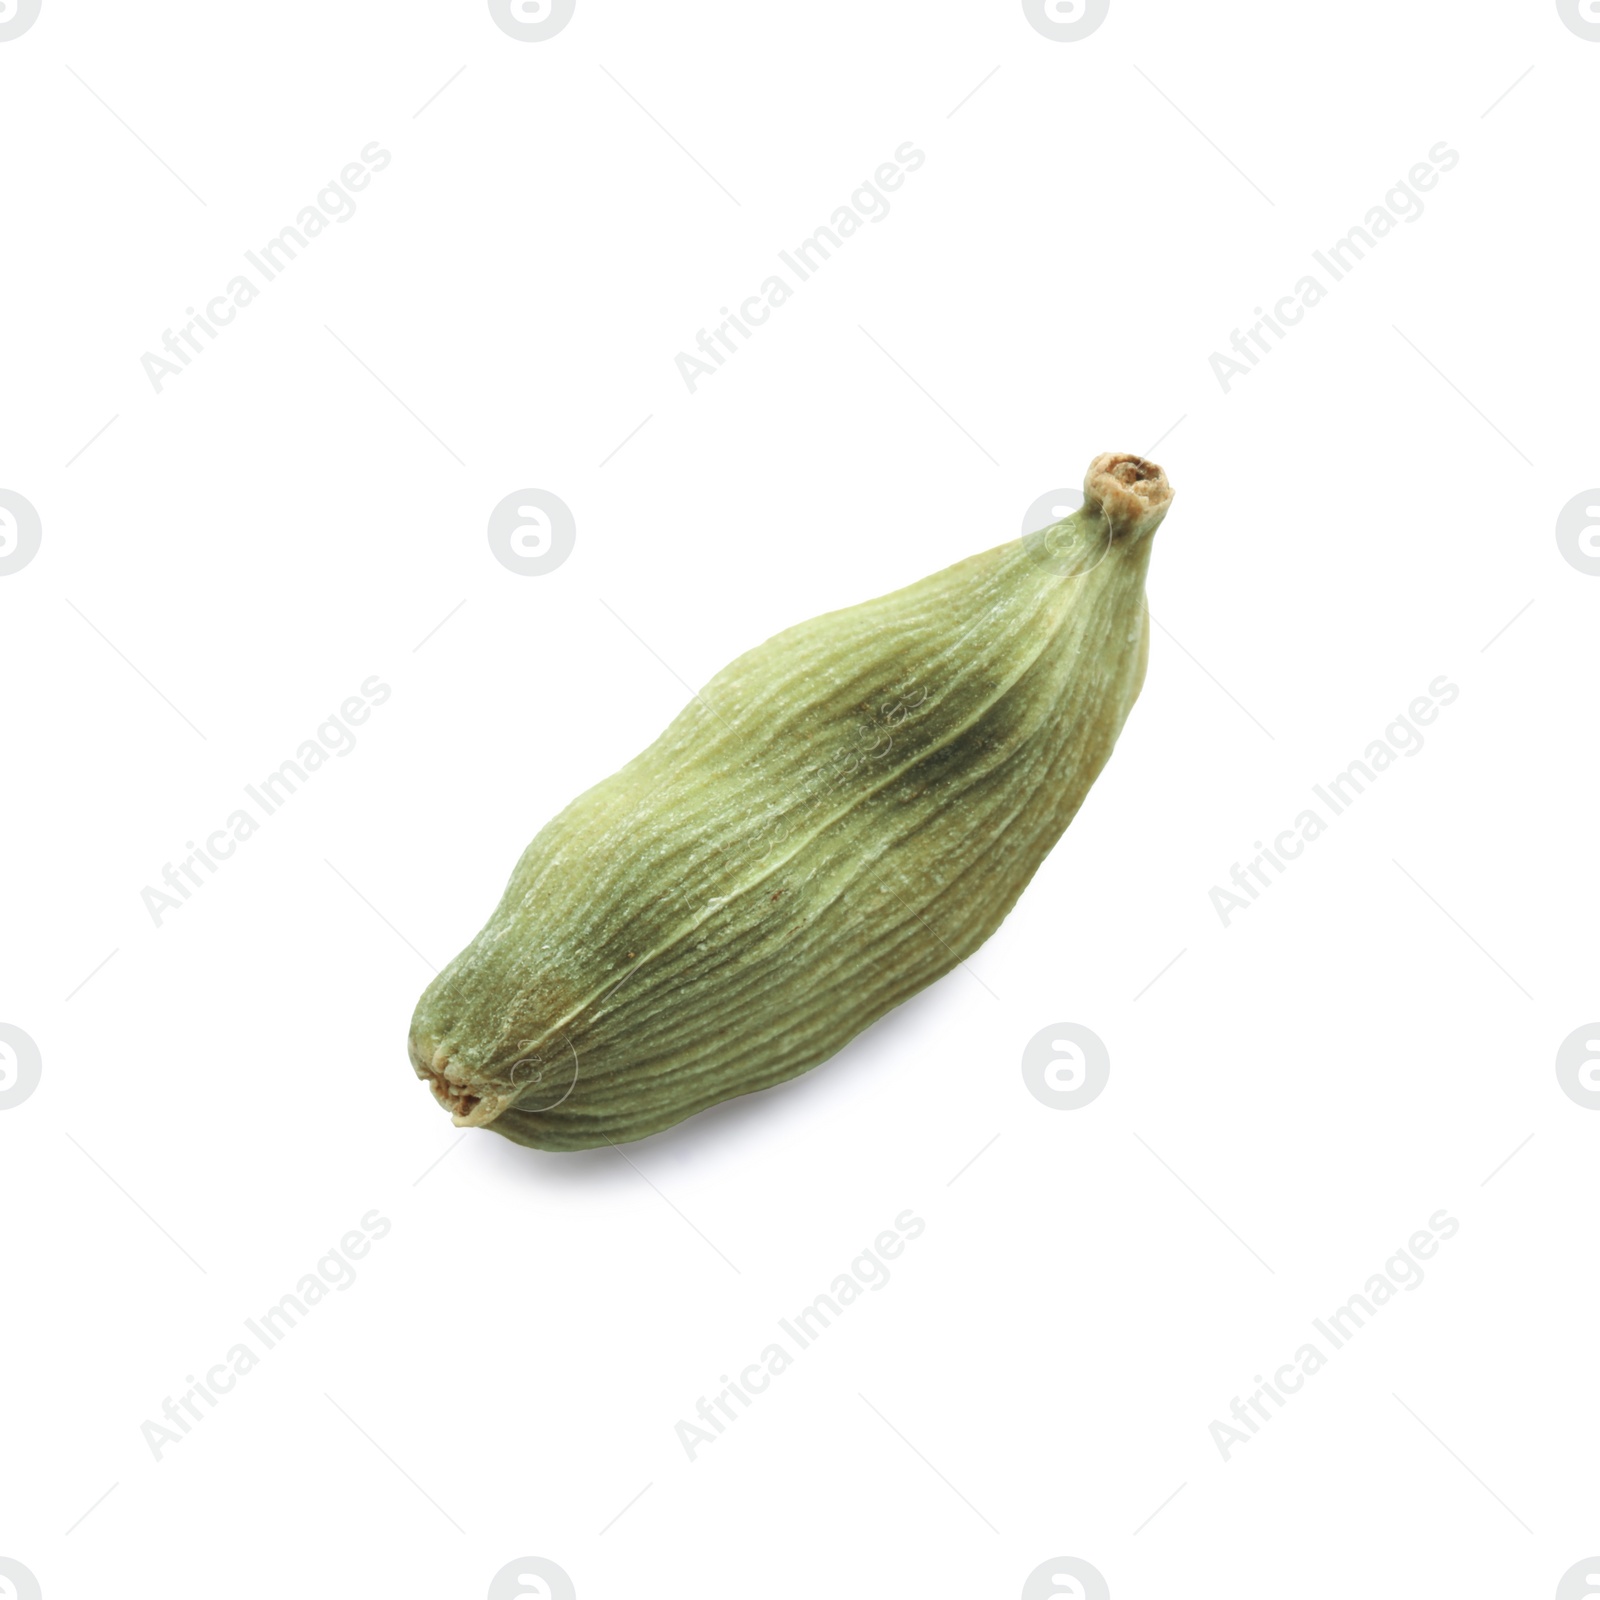 Photo of Dry green cardamom pod isolated on white